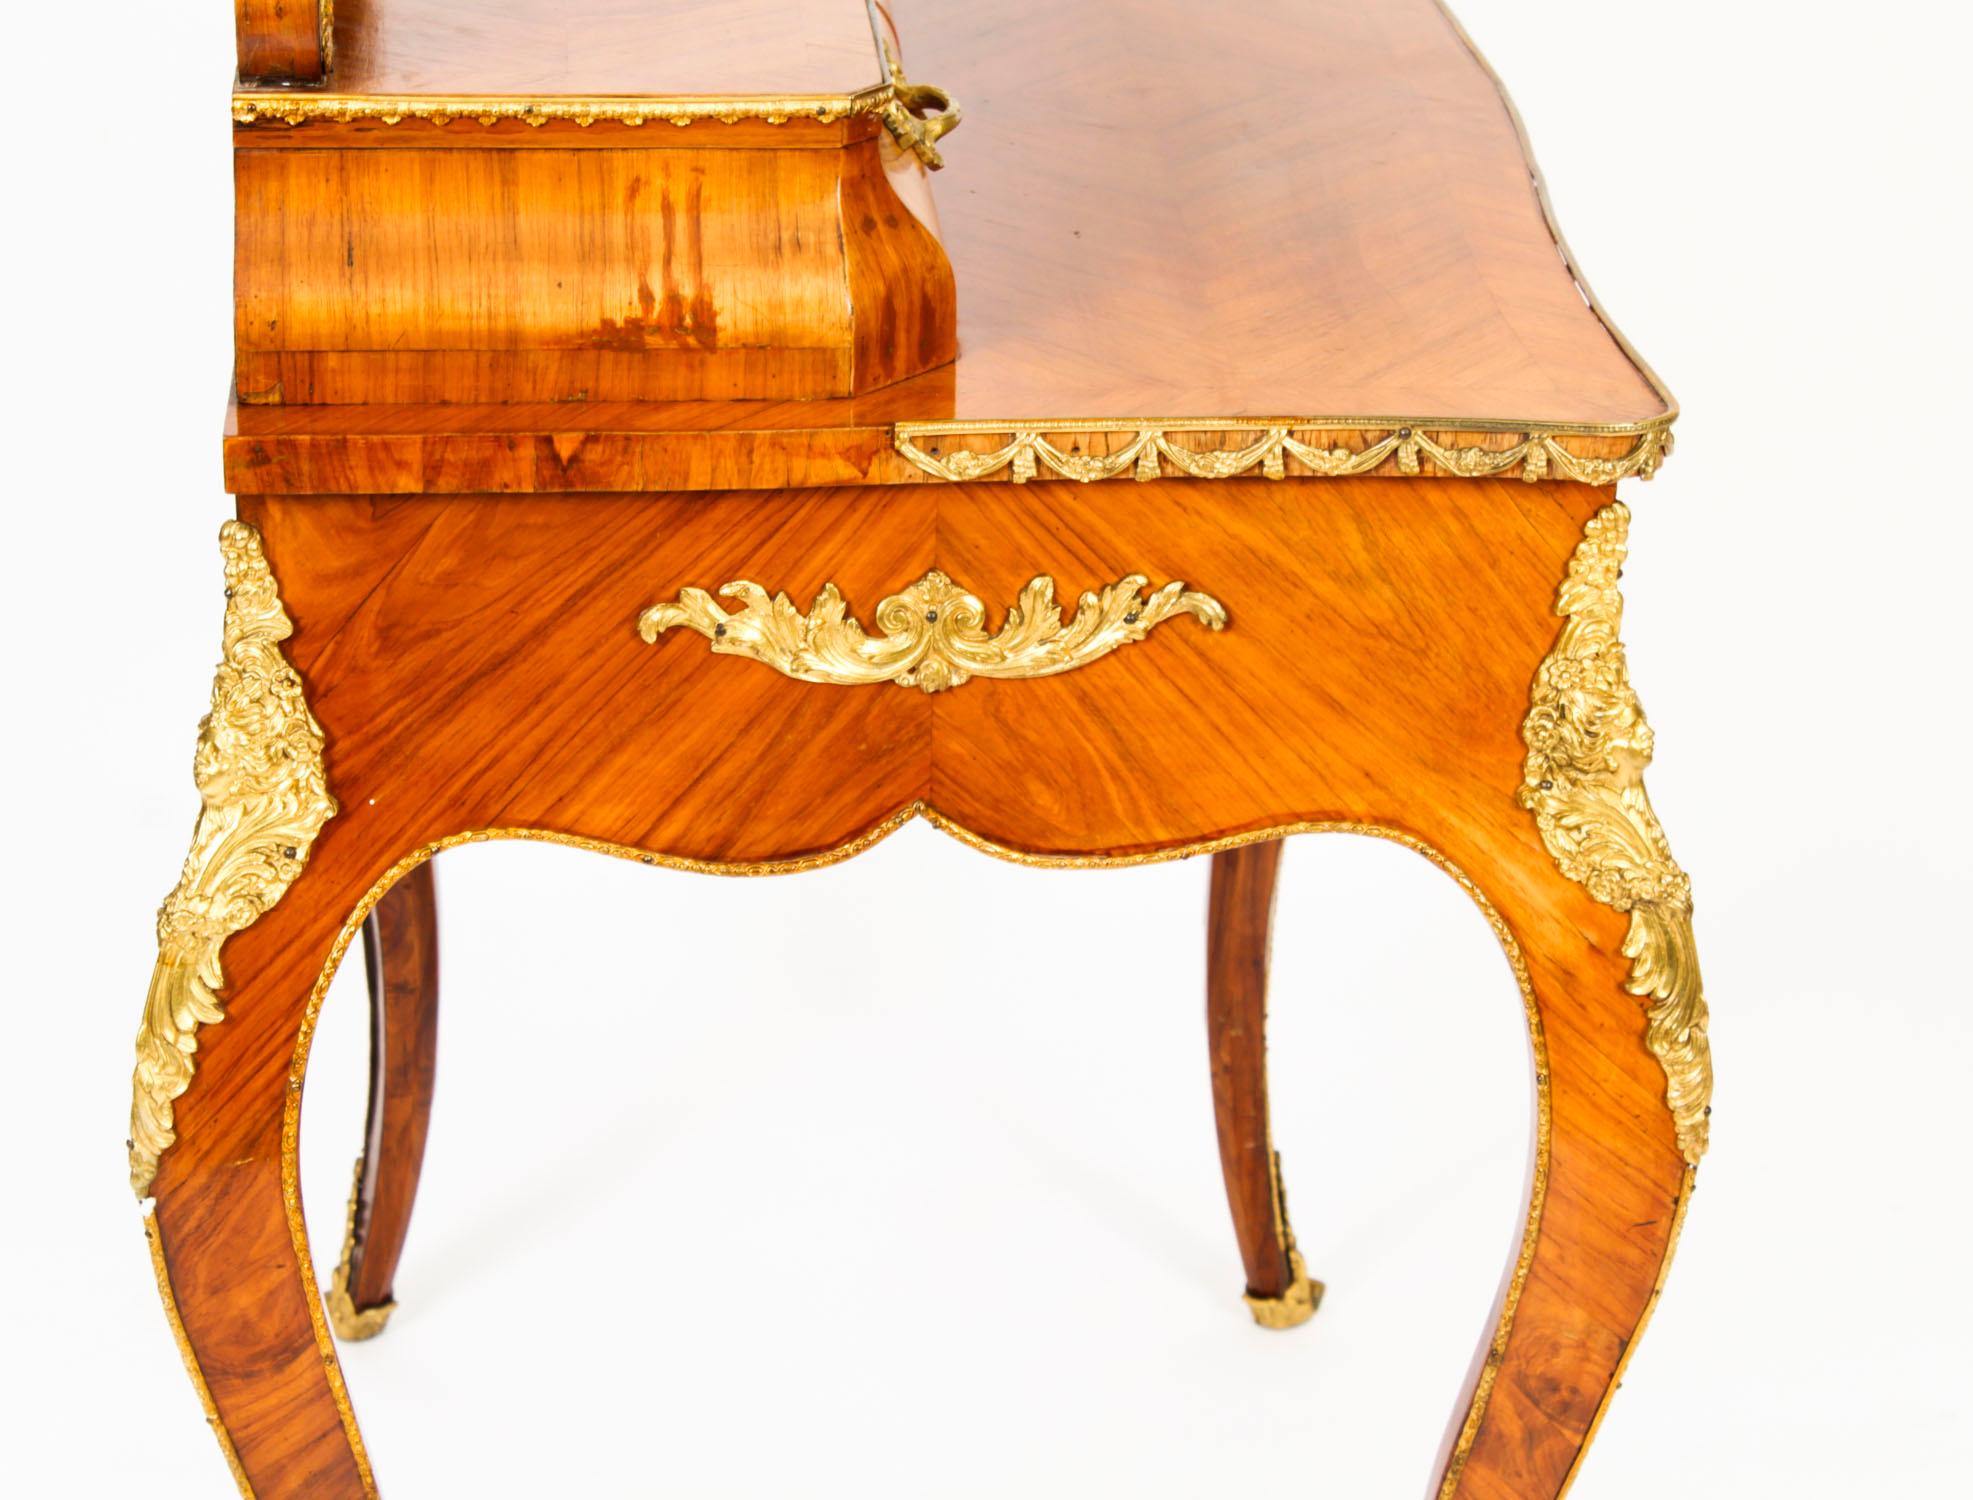 Antique Ormolu & Sevres Porcelain Mounted Dressing Table & Mirror 19th Century For Sale 10